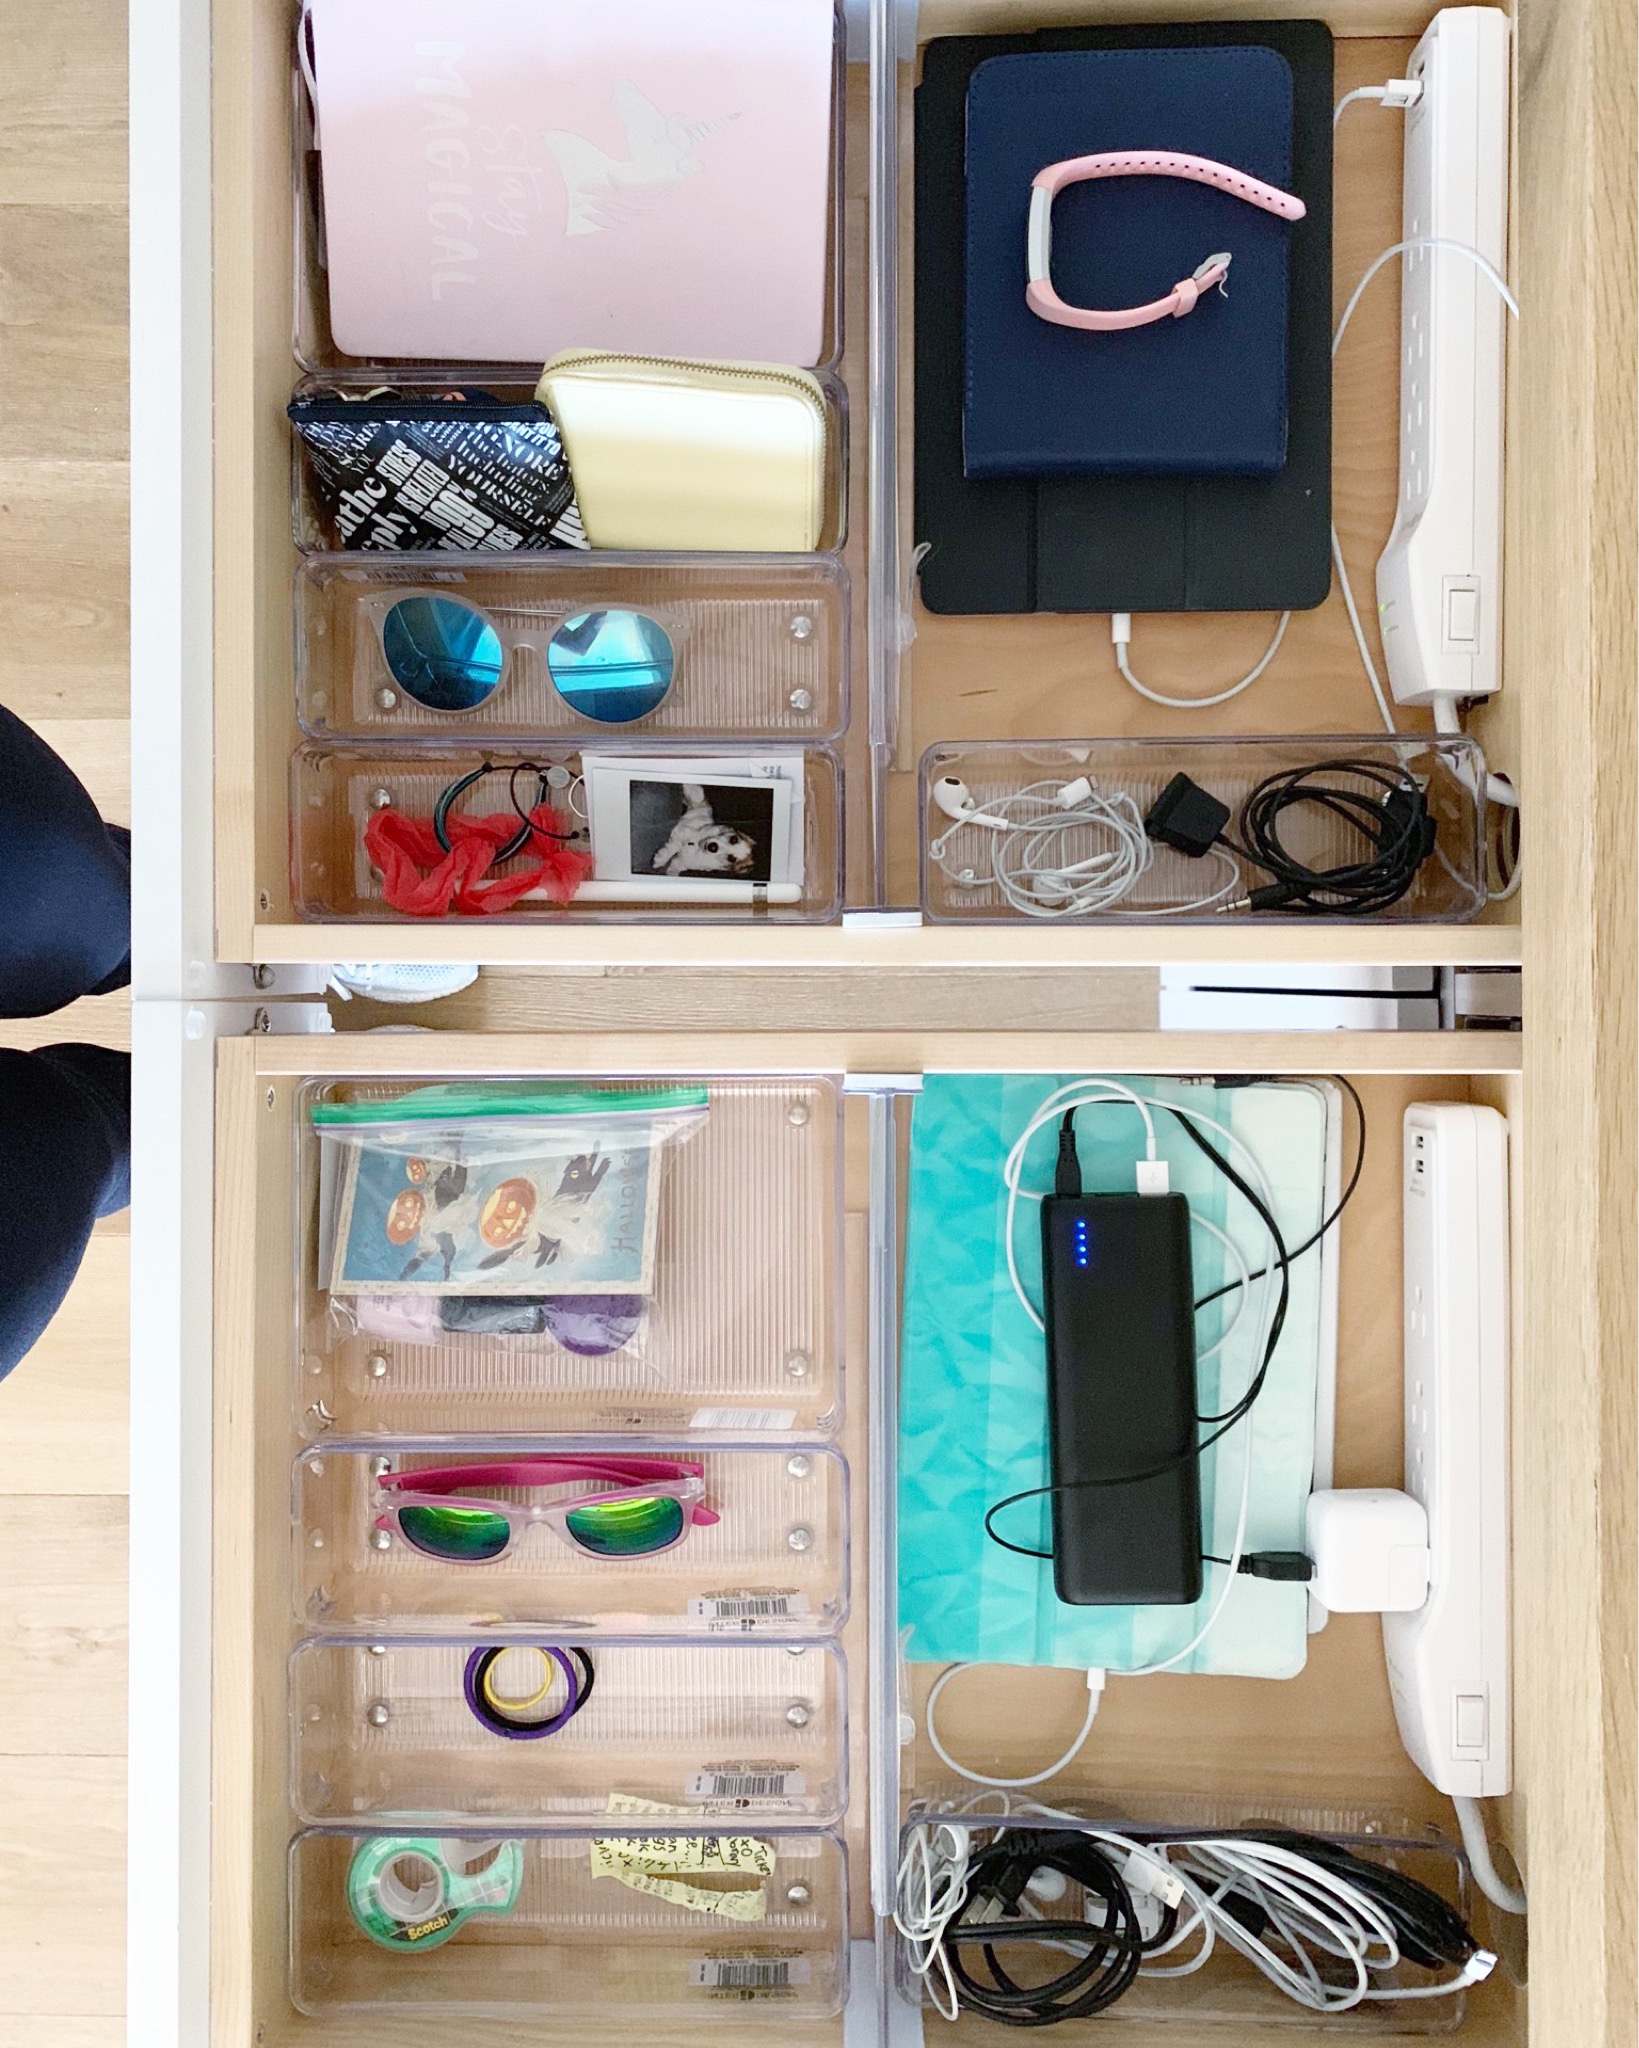 Simply Done: No Odd Space Is Off Limits - simply organized